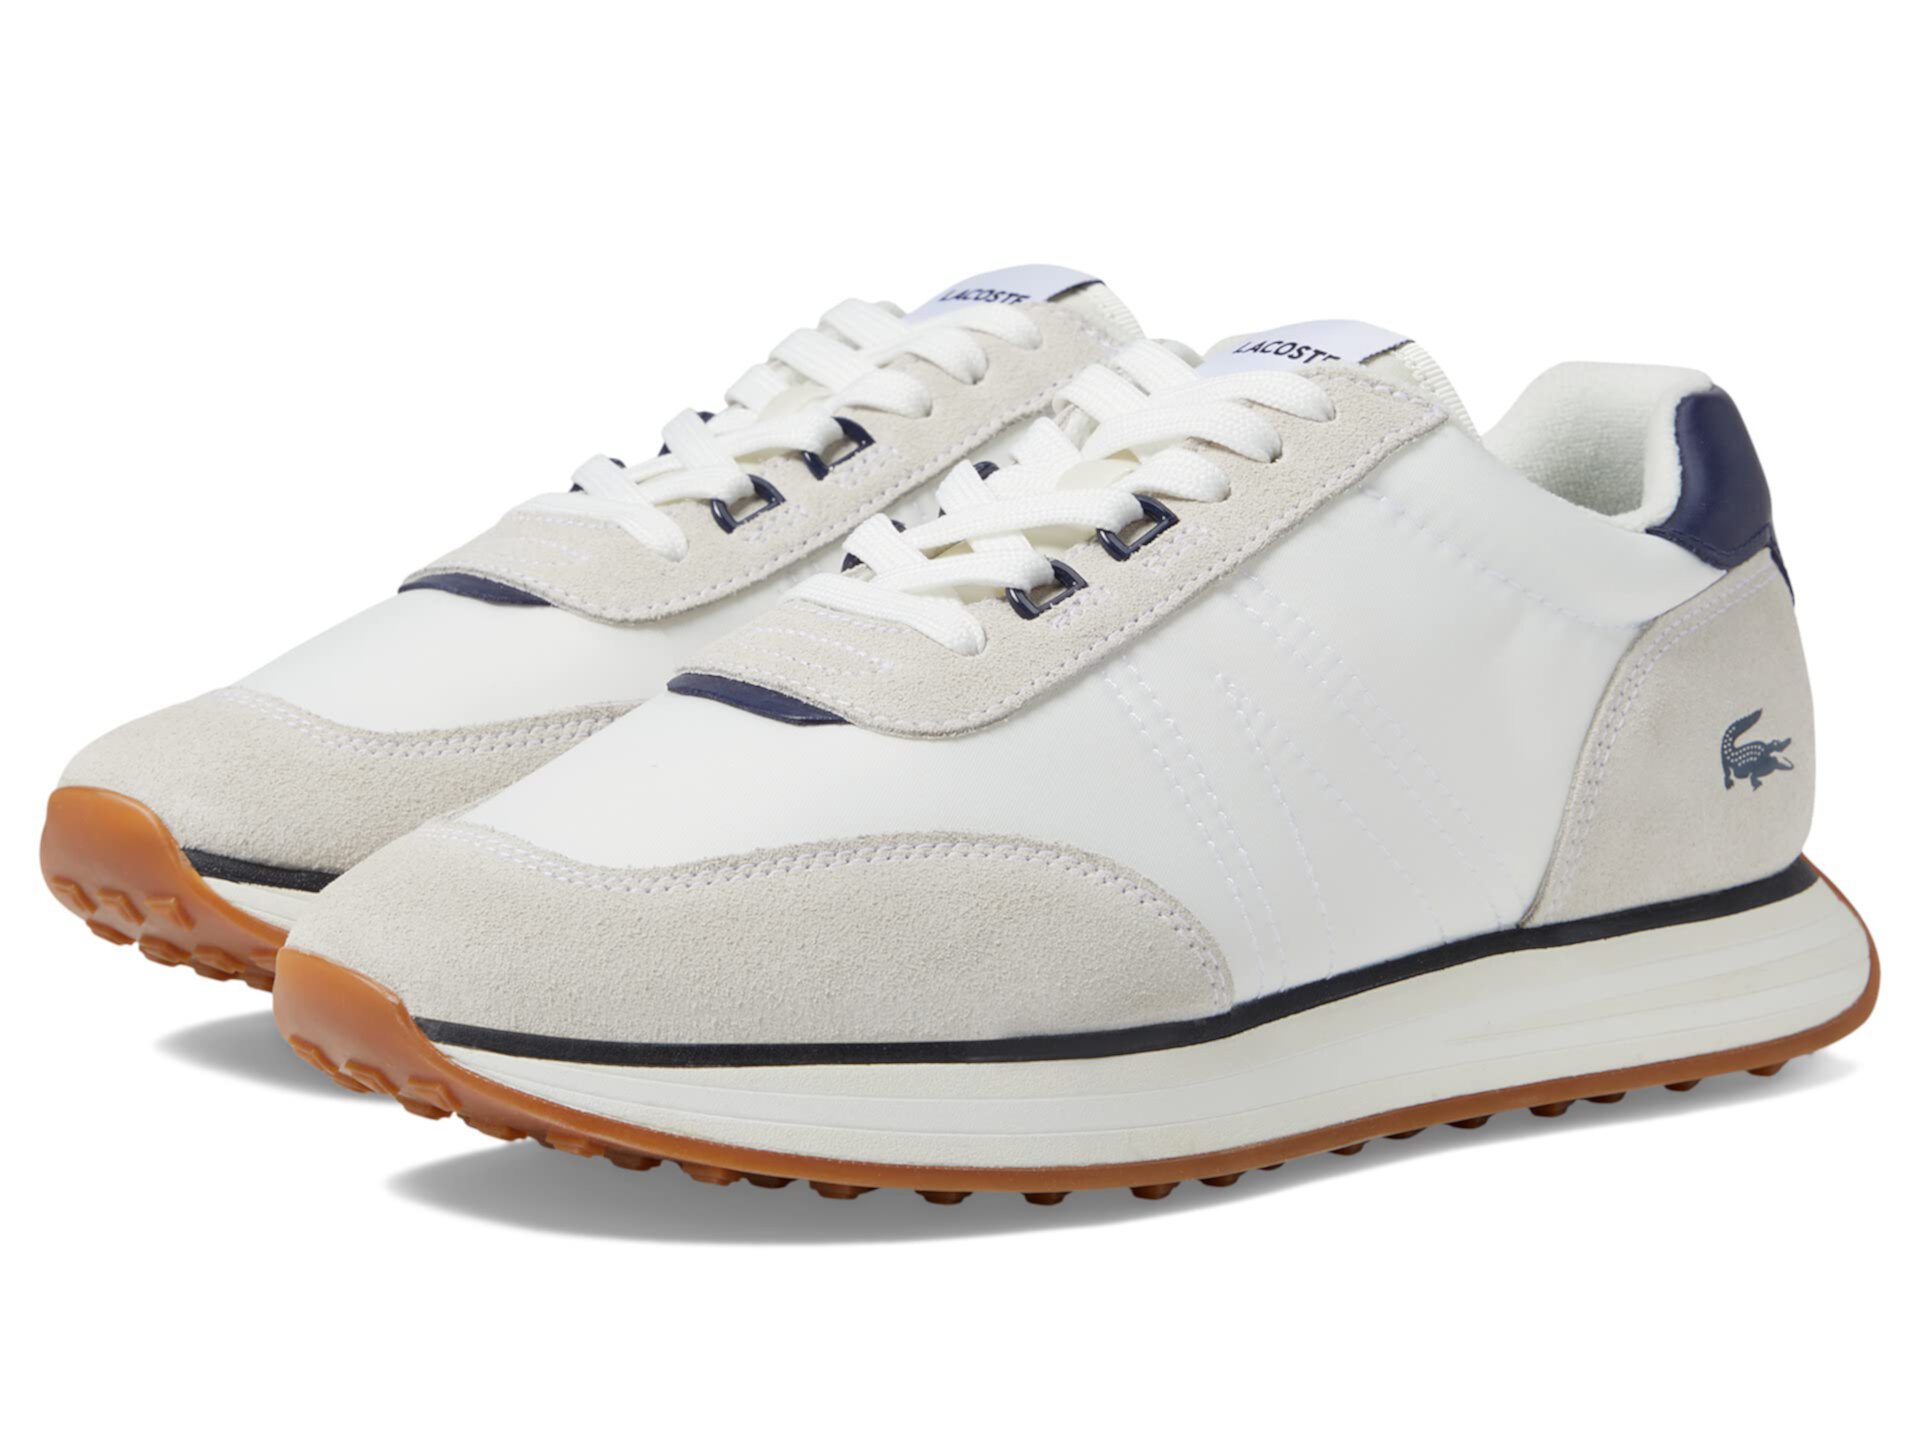 Lacoste lt 125 123 1. Lacoste Carnaby piquee. Кроссовки l-Spin.